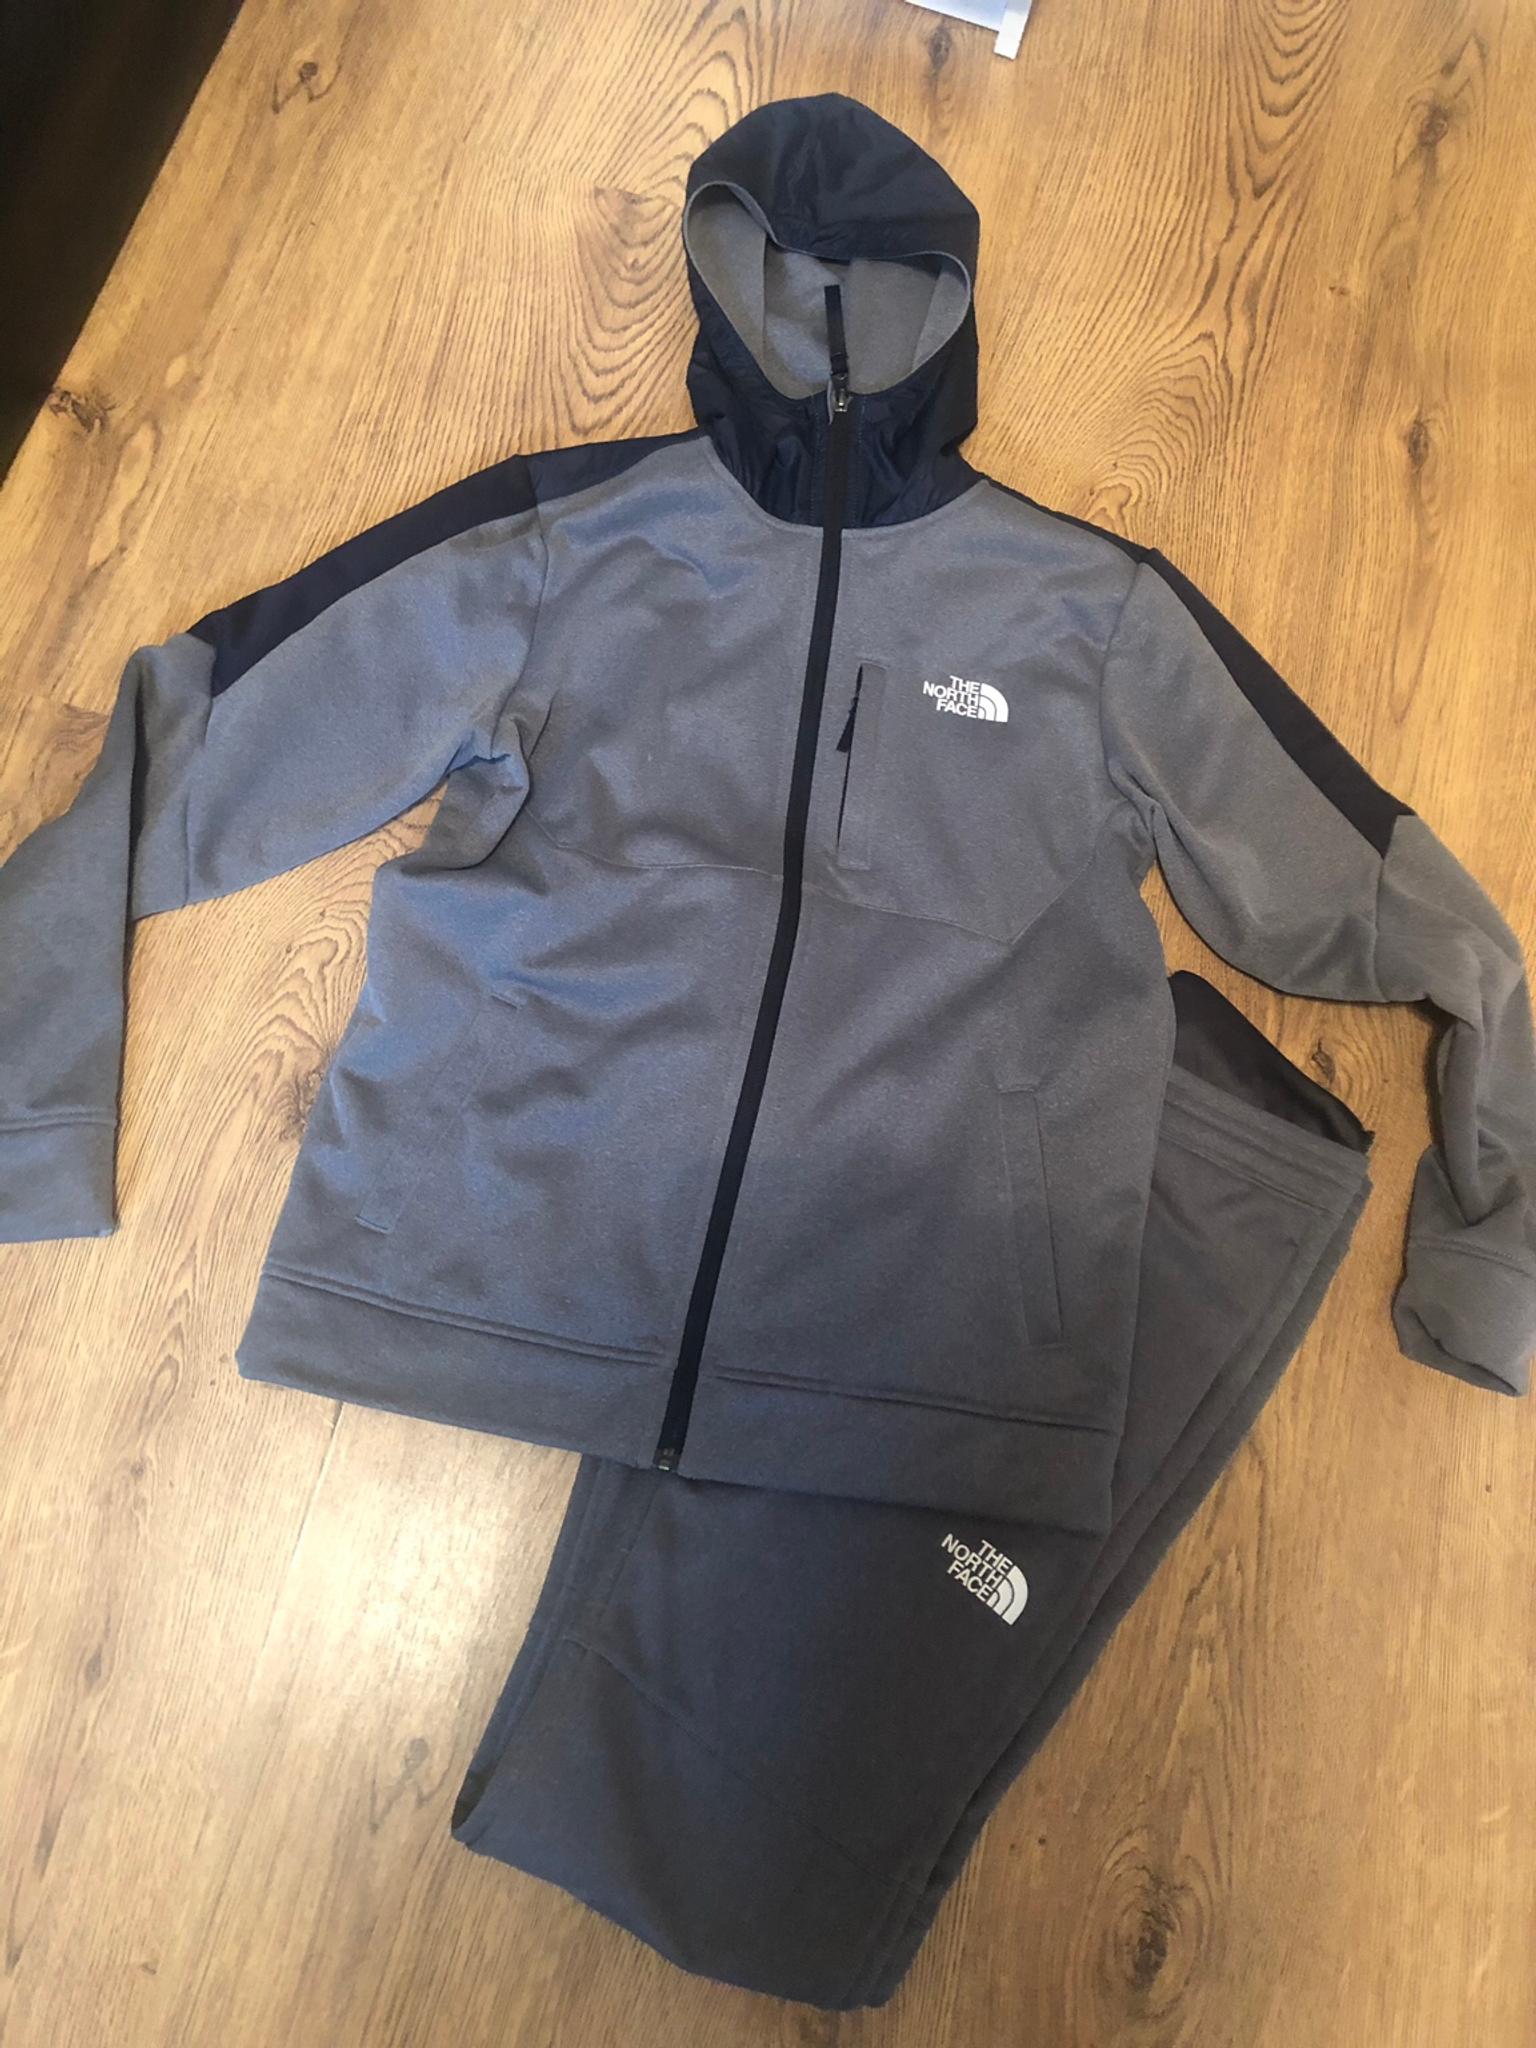 Boys XXL north face tracksuit age 15-16 